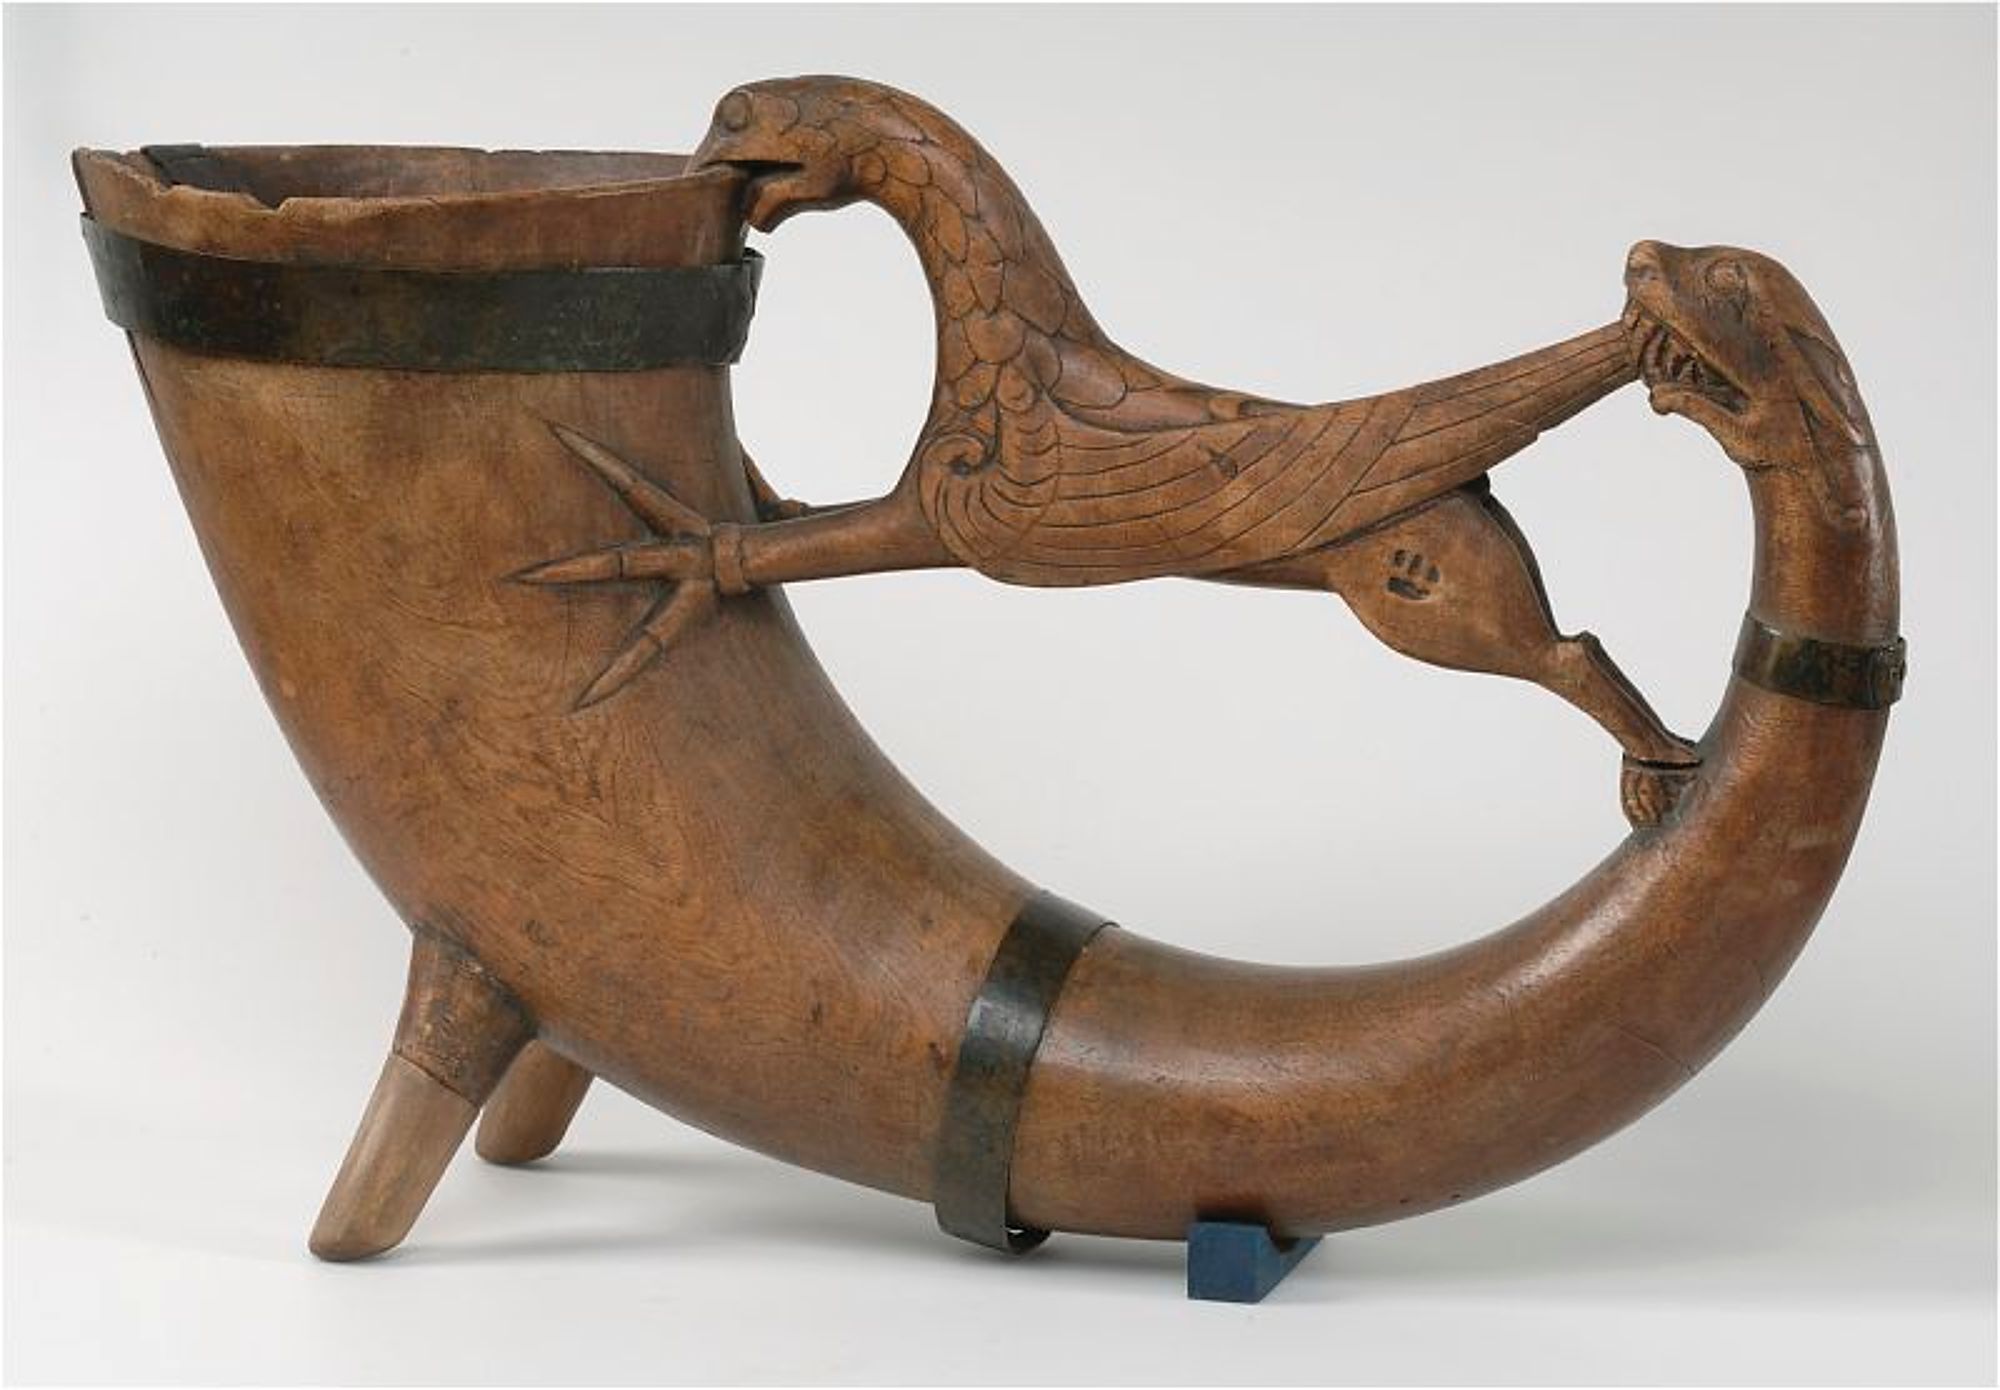 A medieval Swedish drinking horn made from birch wood with carved figures of a griffin and dragon, likely from the mid-13th to mid-14th centuries.jpg